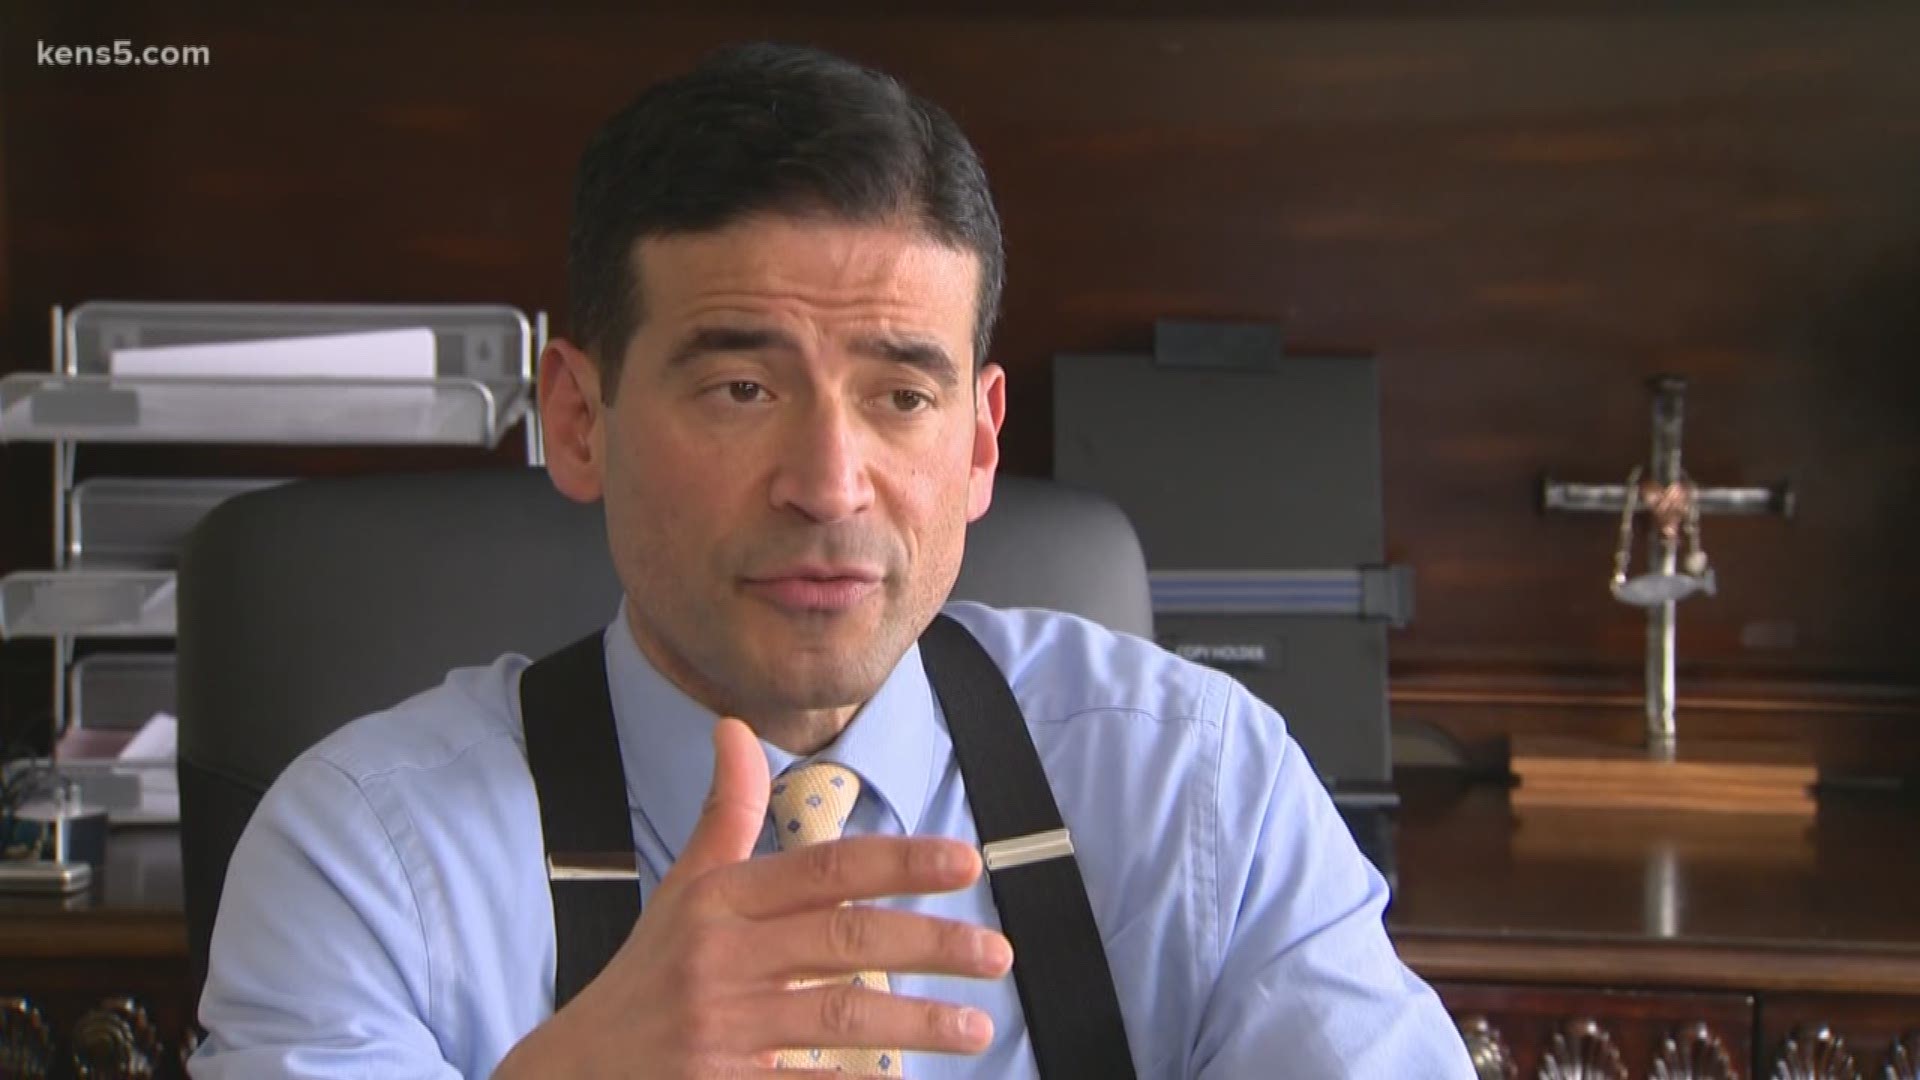 Former Bexar County district attorney Nico LaHood has been placed on probation. The State Bar of Texas Grievance Committee found he committed "professional misconduct" while he was in office.